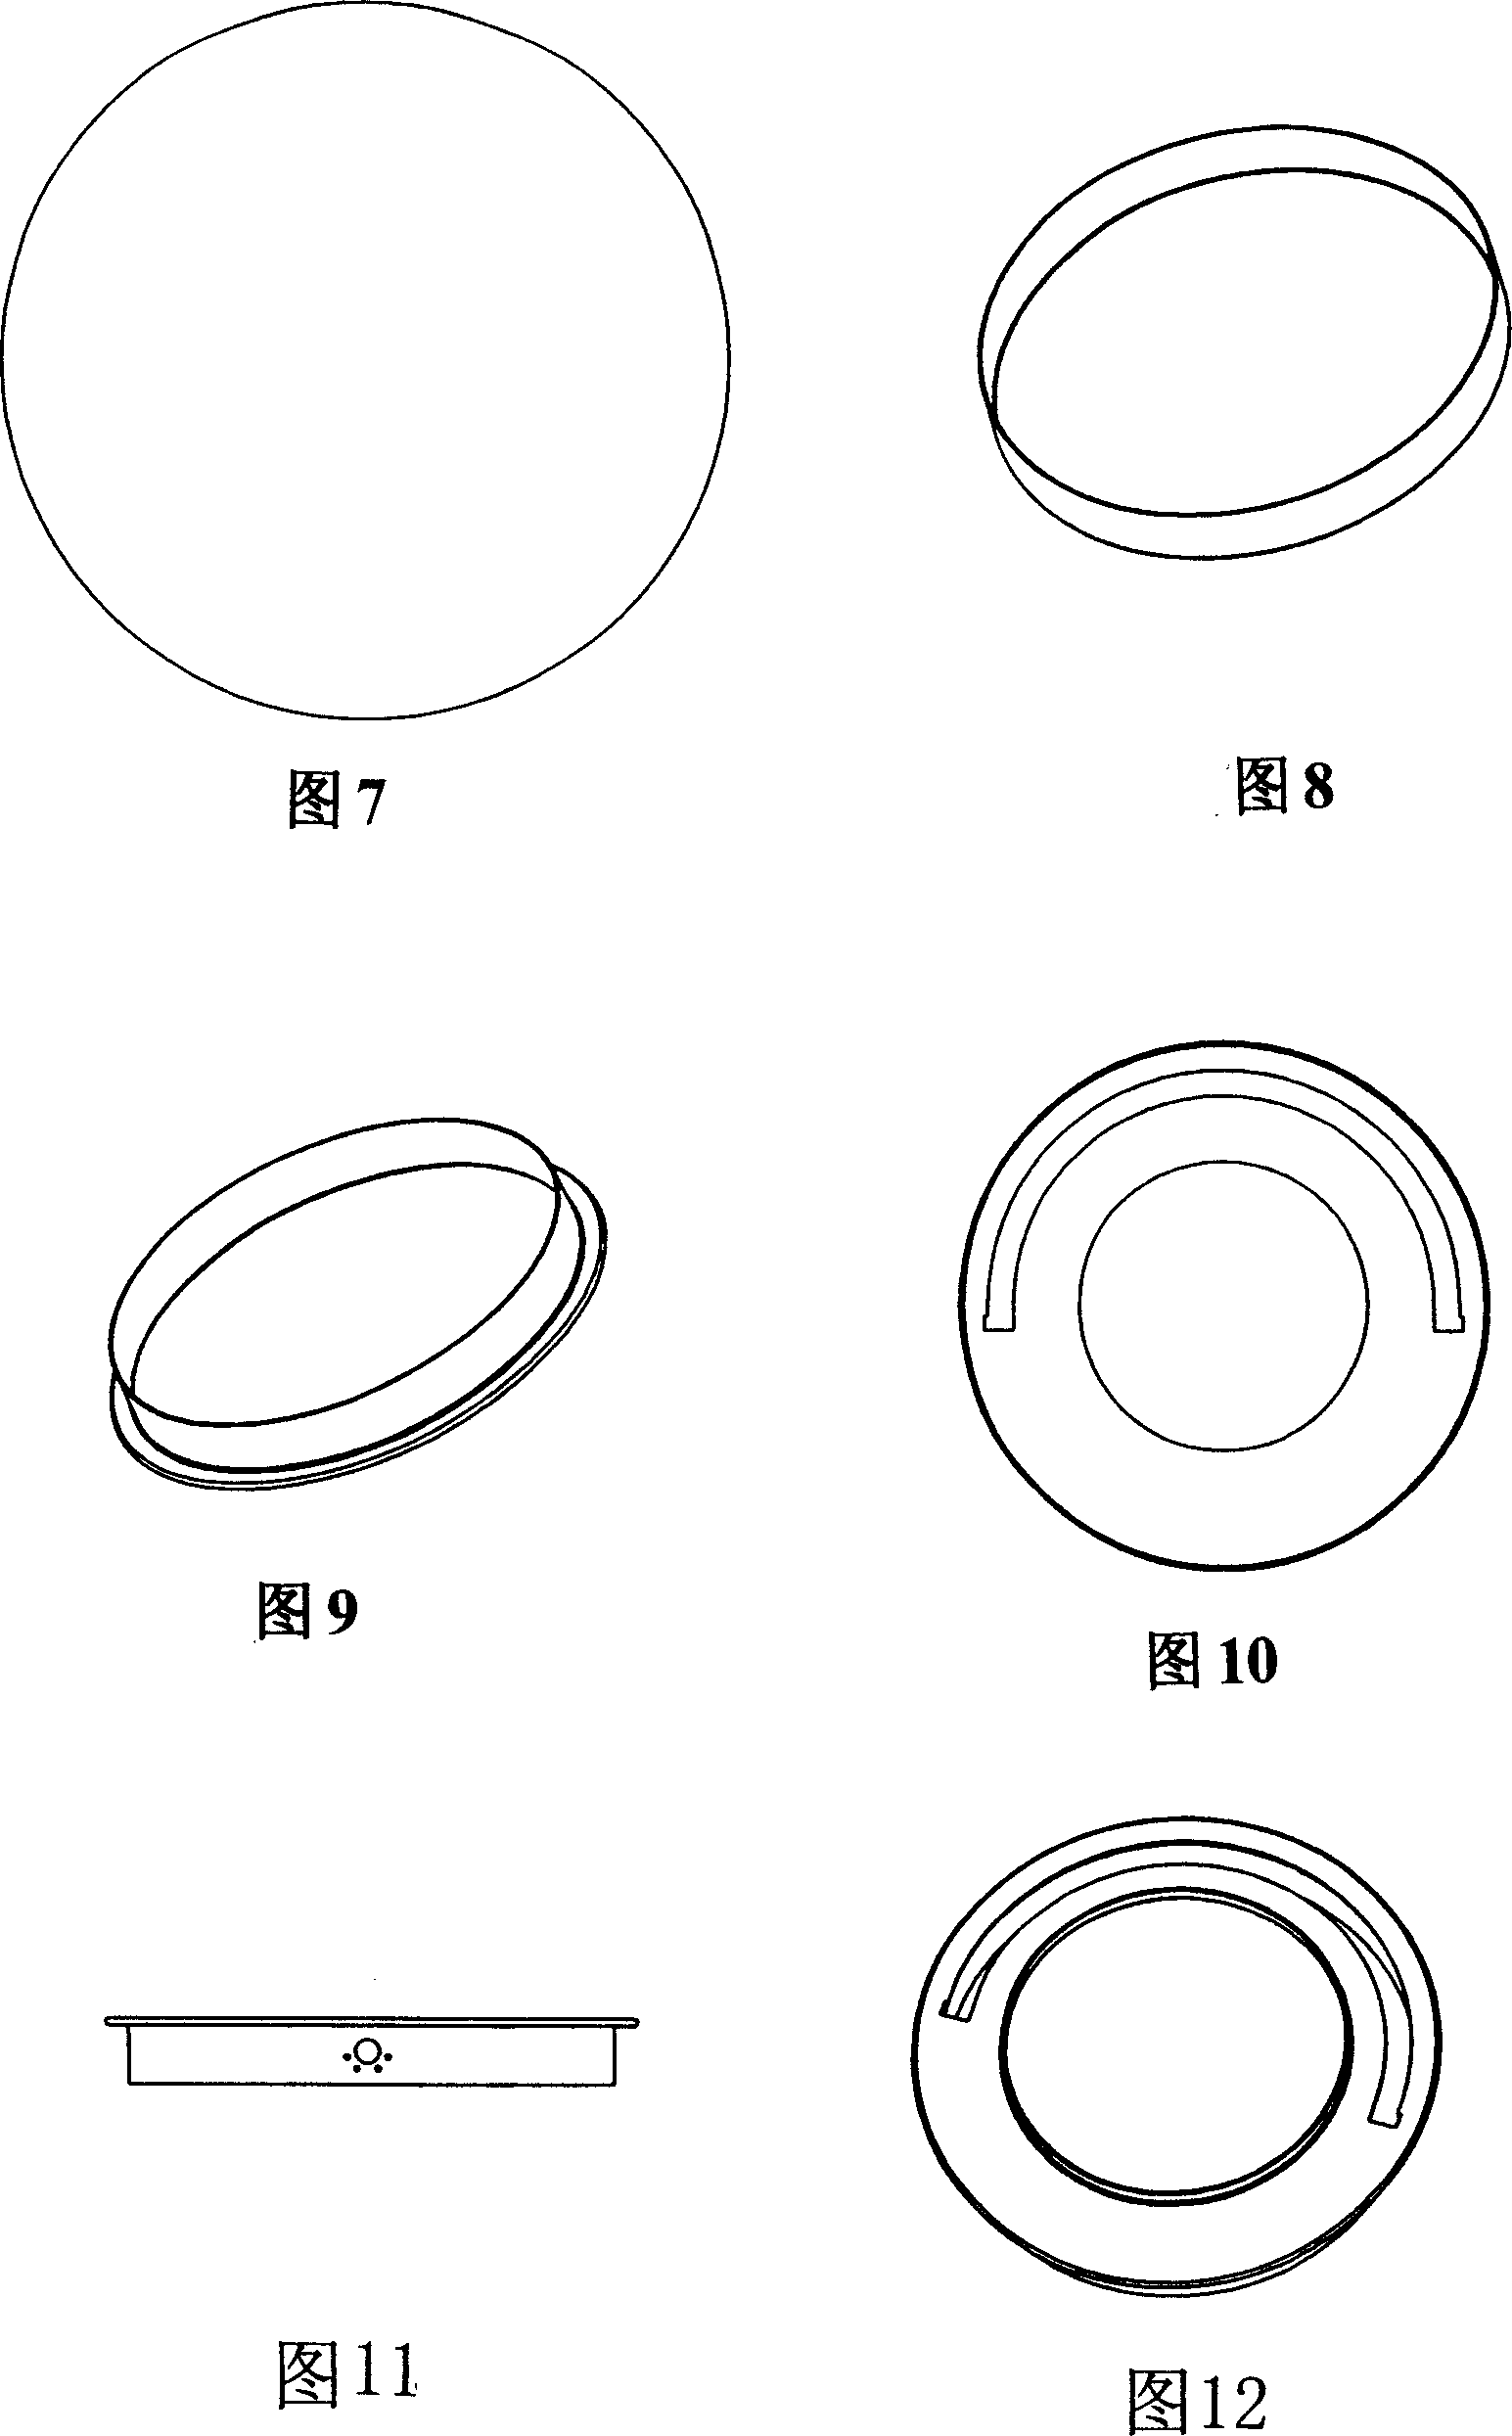 Integral drawn technique for faceplate of buffet dinner stove